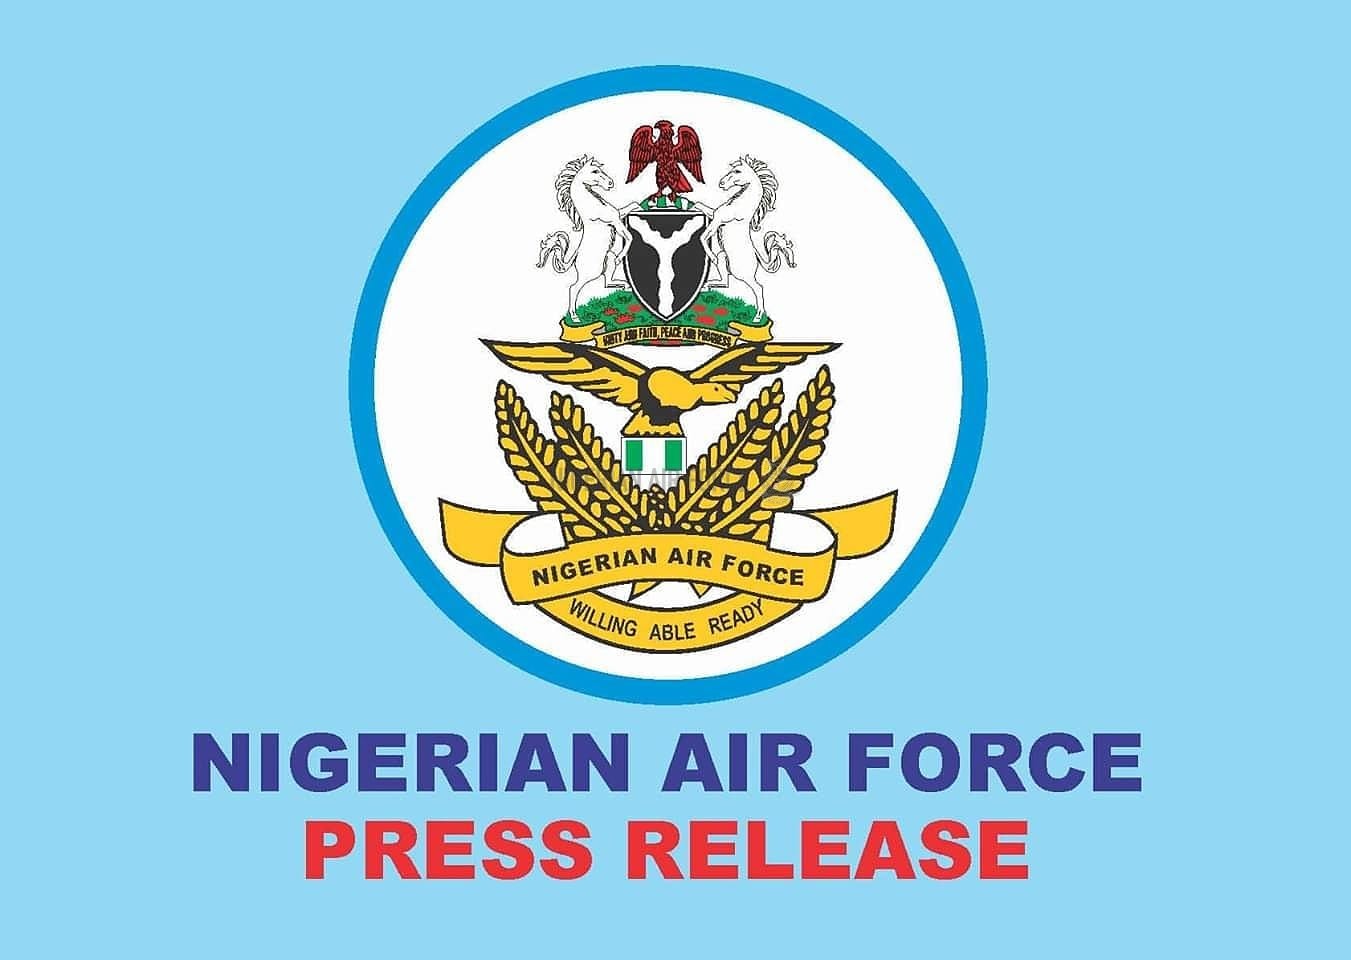 BEWARE OF ACTIVITIES OF FRAUDSTERS MASQUERADING AS NAF RECRUITMENT AGENTS